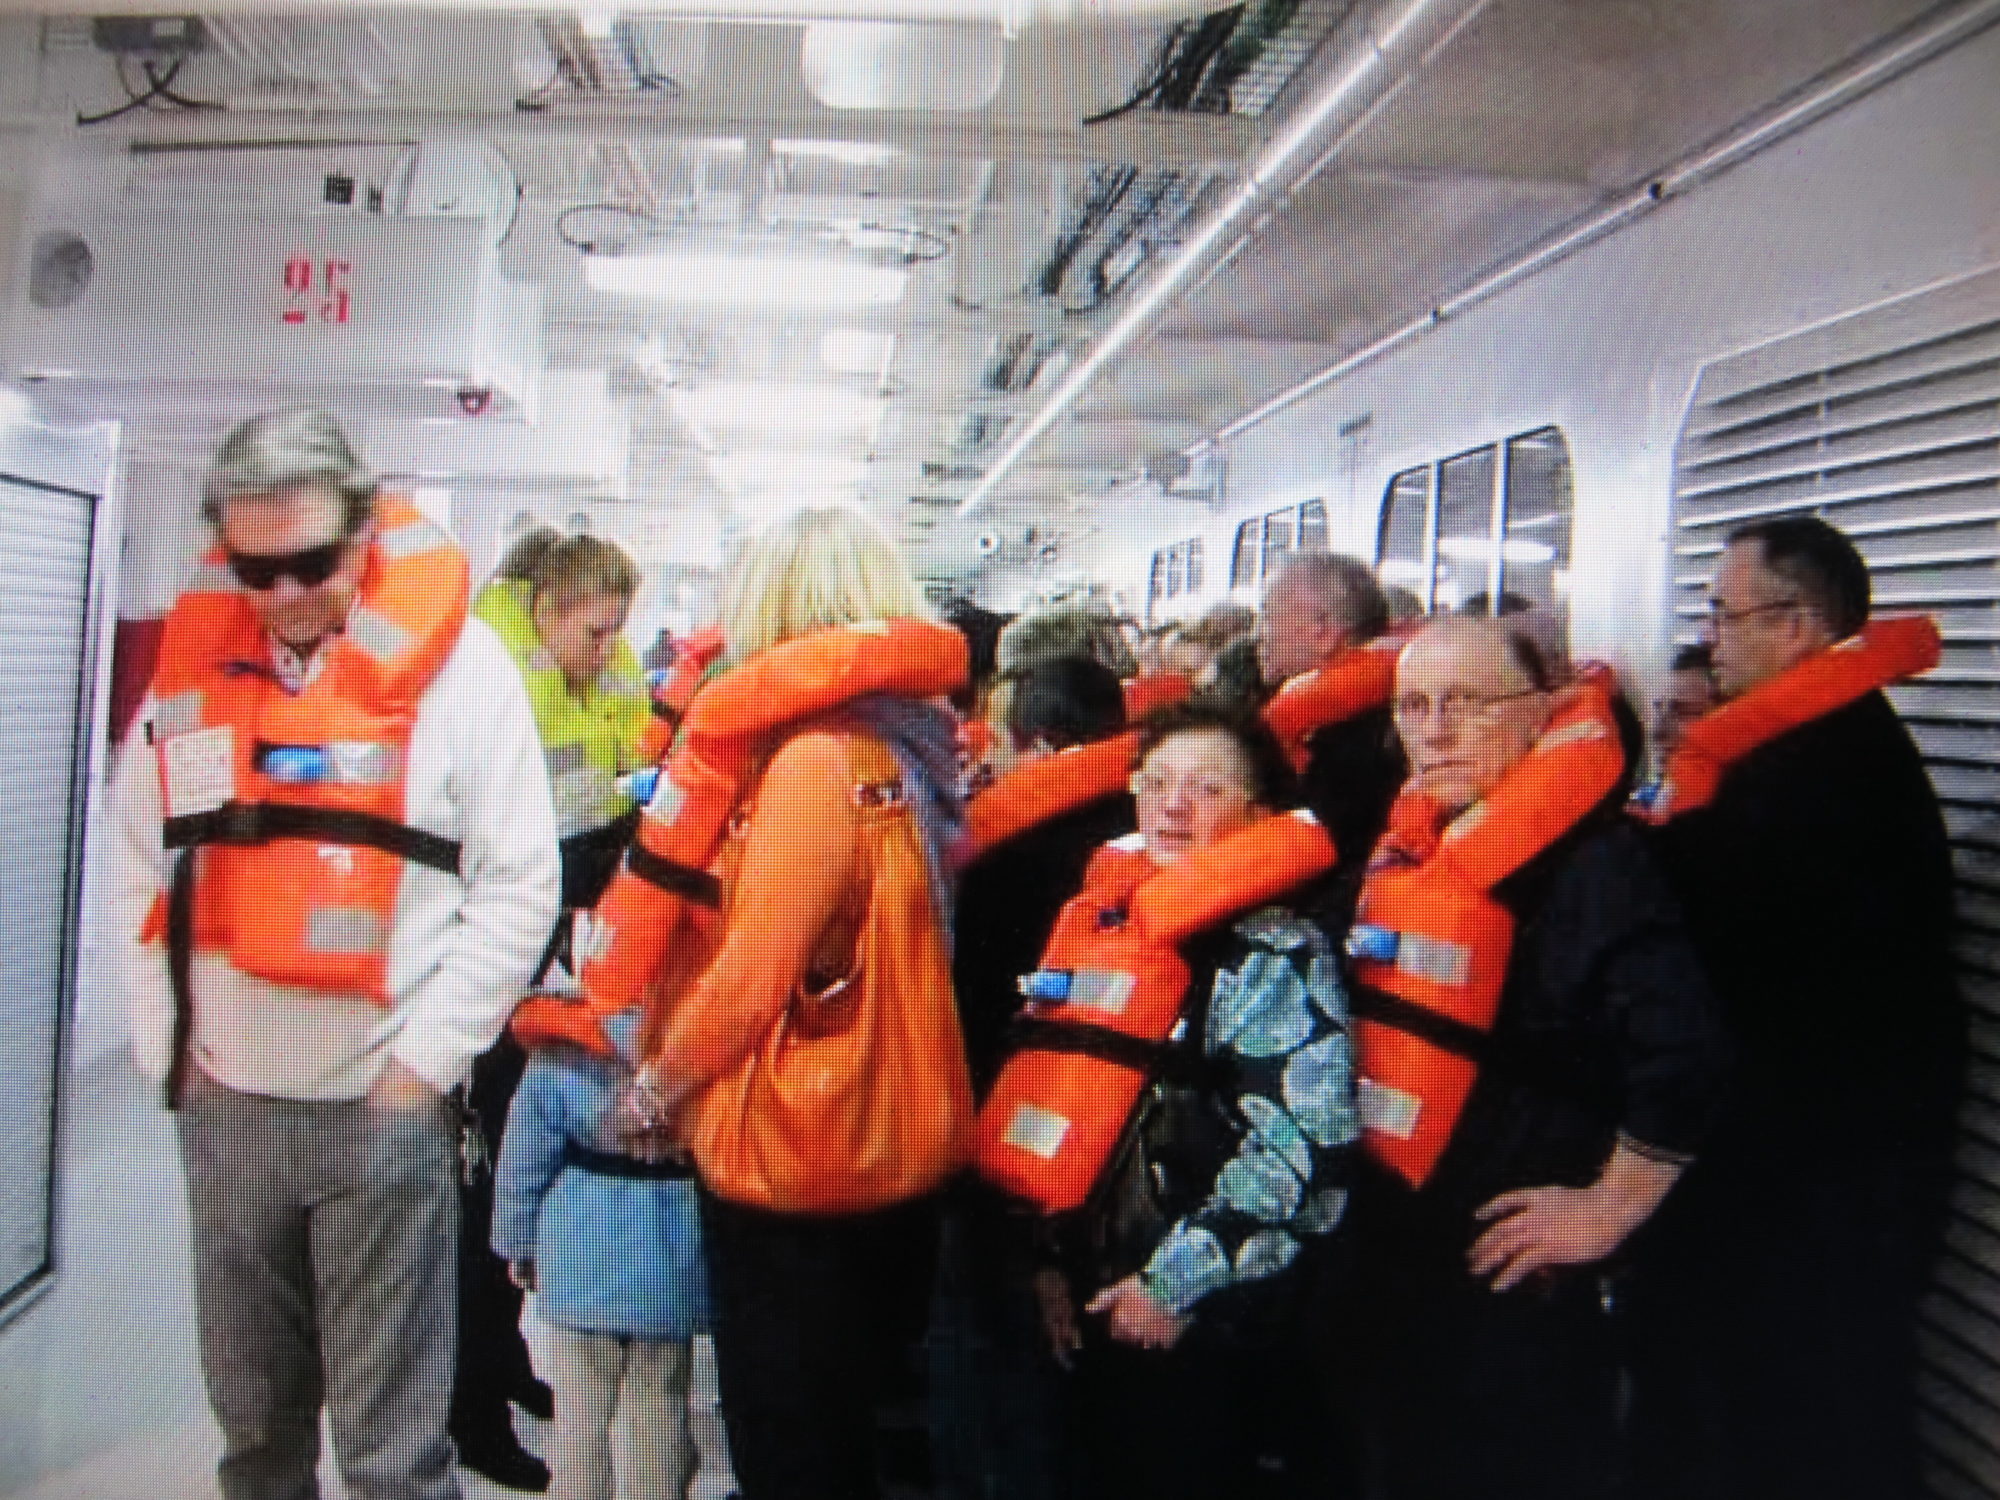 group of people in a white space wearing orange life jackets